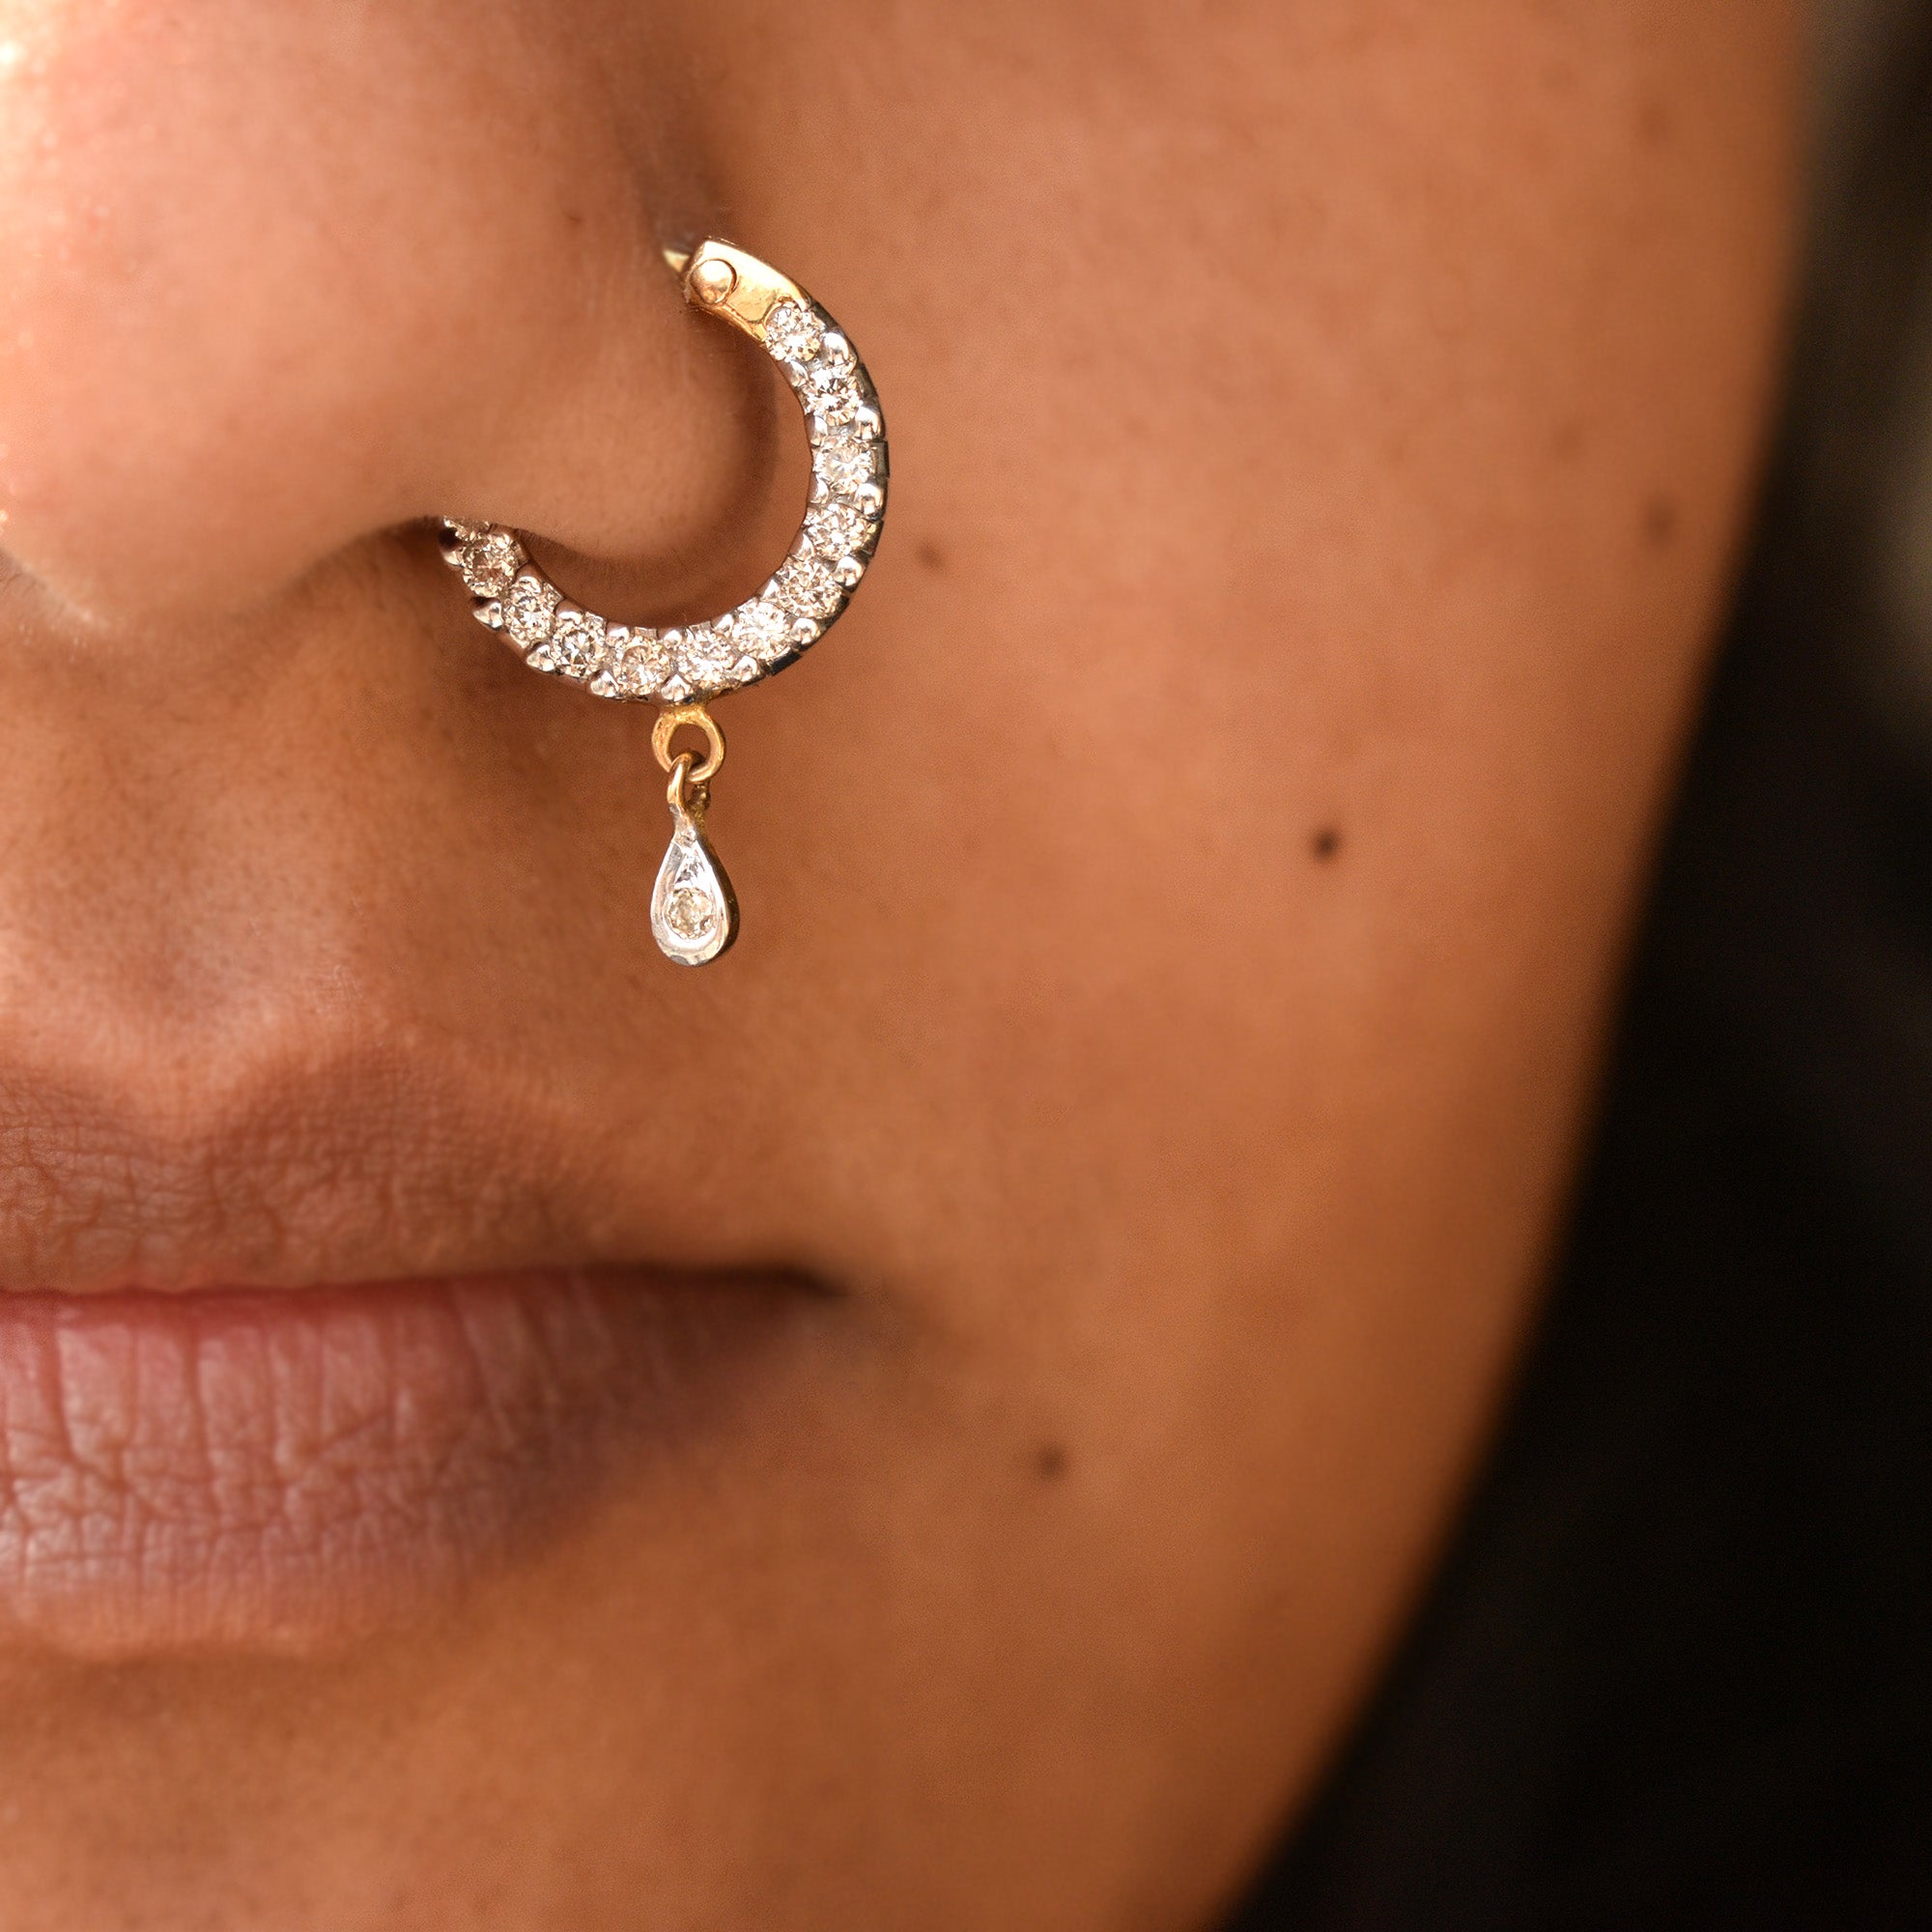 Buy 2pc Gold/silver Indian Diamond Nose Ring, Nose Stud, Gold Nose Hoop,  Silver Nose Piercing, Twist in Nose Stud Online in India - Etsy